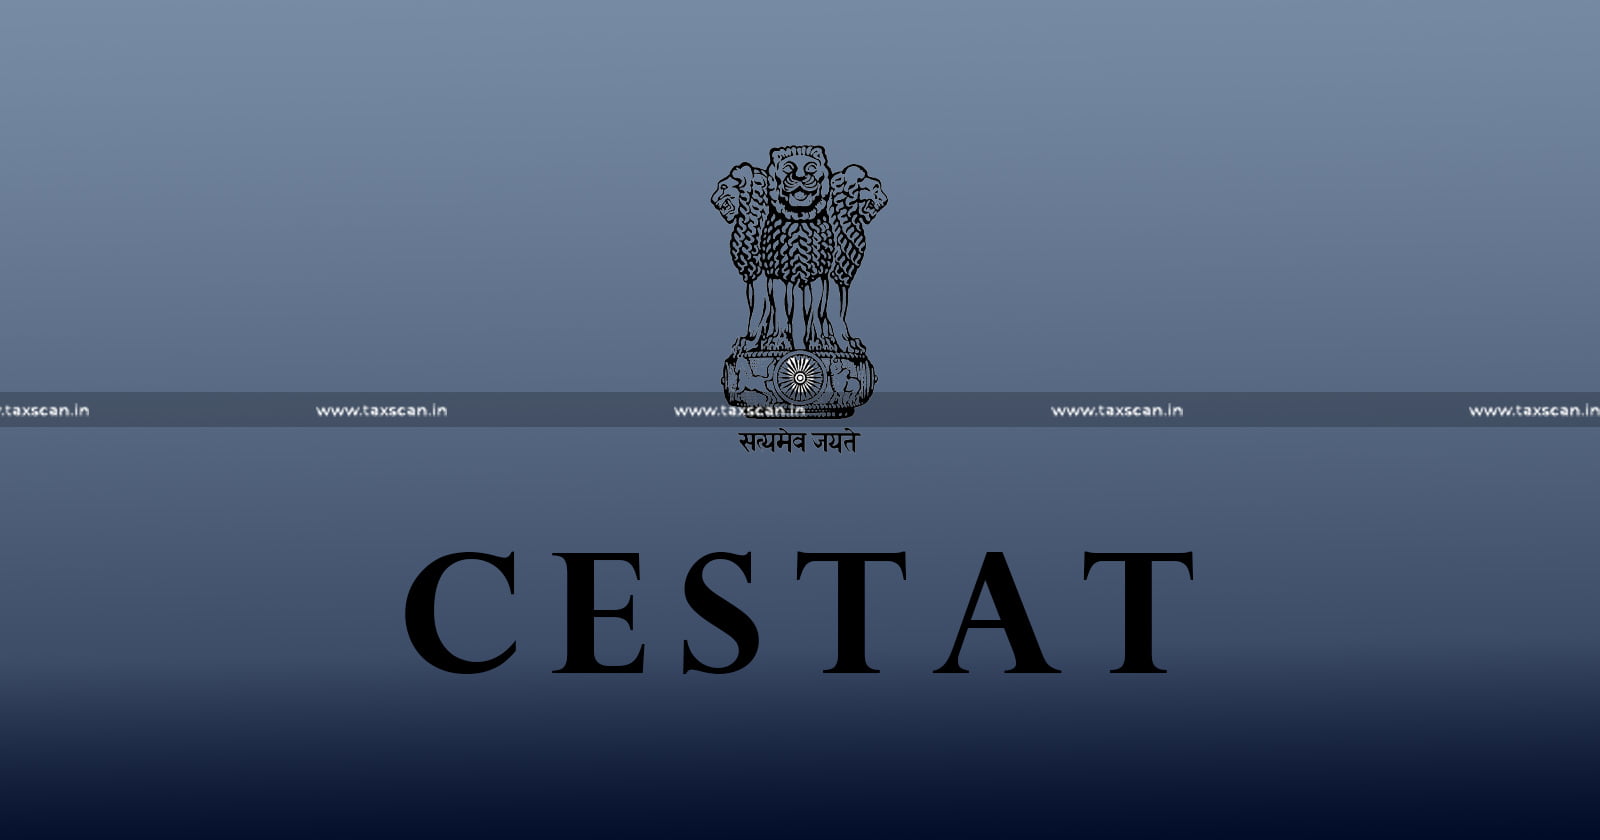 CESTAT - Weekly Round-Up - CESTAT Weekly Round-Up - Customs - Excise - Service Tax - Taxscan